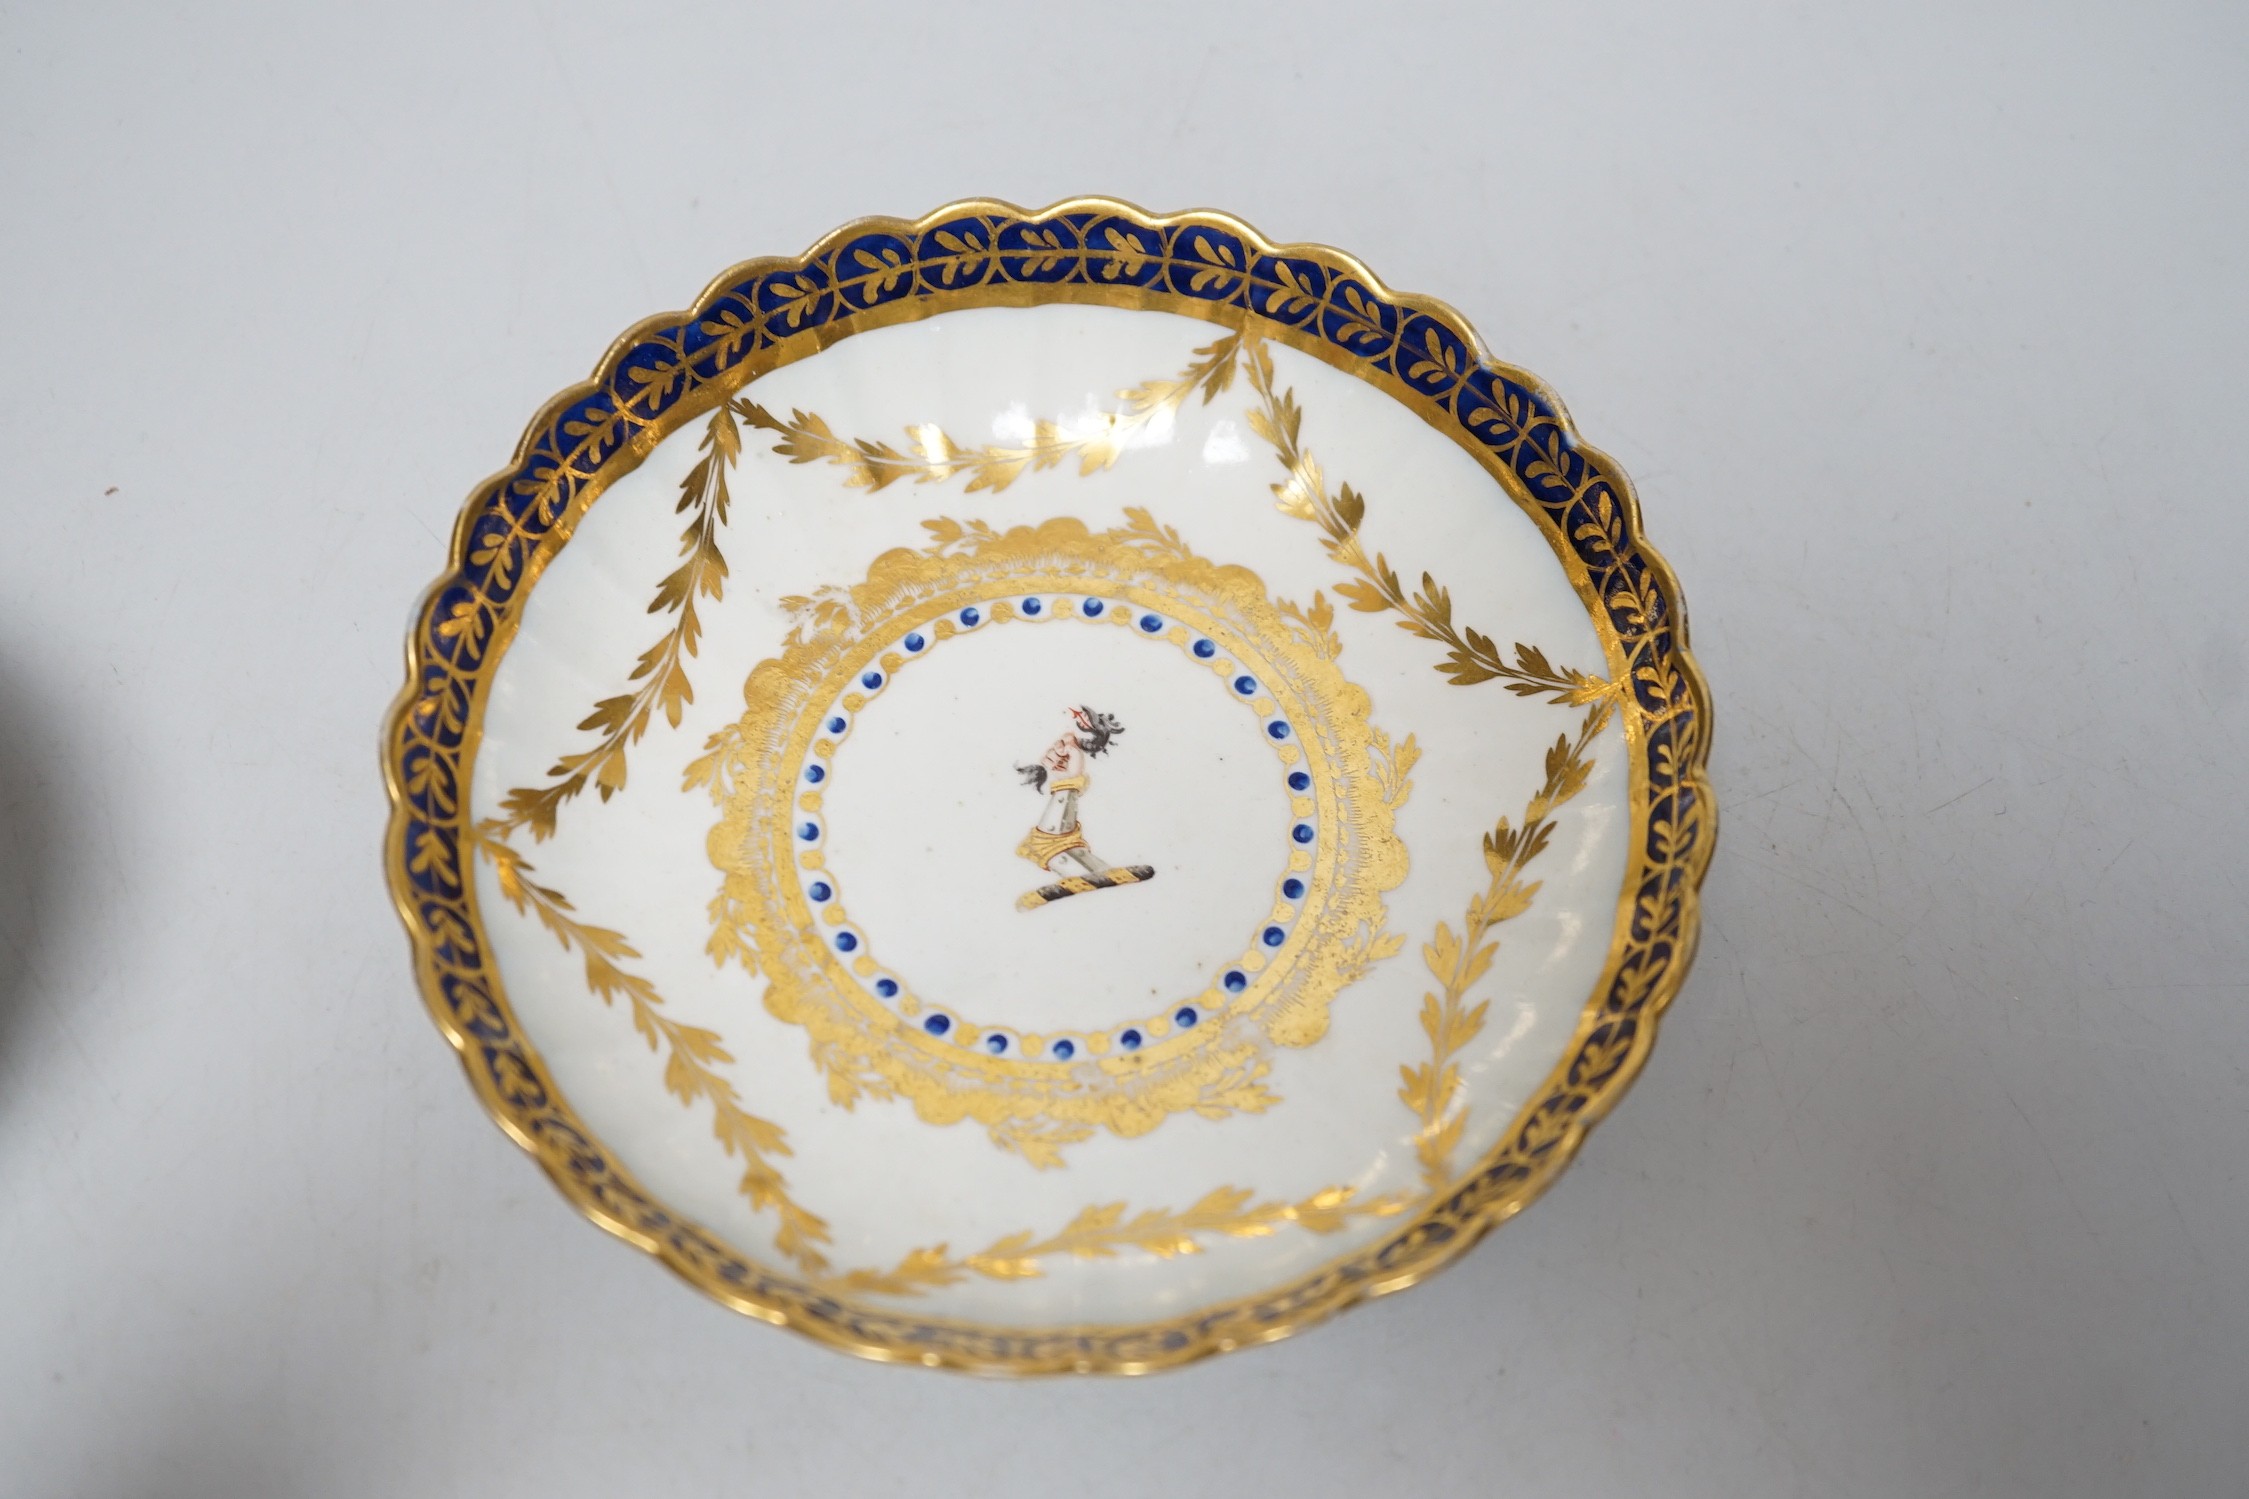 An 18th century Caughley rare teabowl and saucer painted with a crest of an arm clutching a dragon encircled by three gilt borders, 6cm tall overall